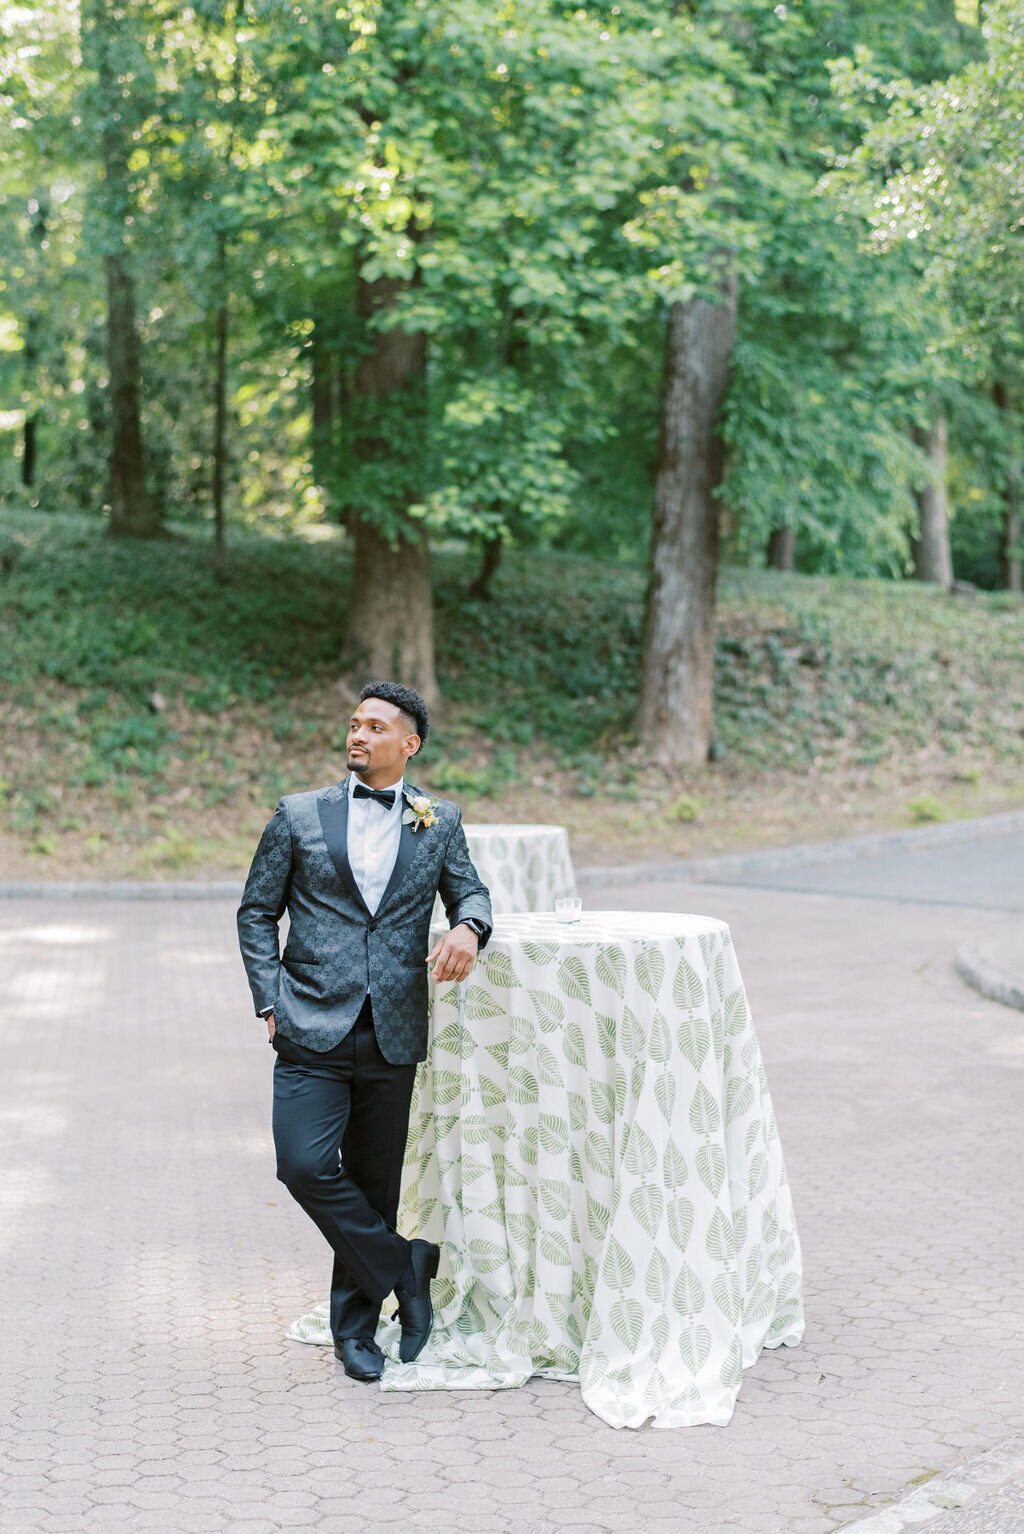 roxii-nate-cator-woolford-garden-atlanta-engagement-session-destination-wedding-glorious-moments-photography-41